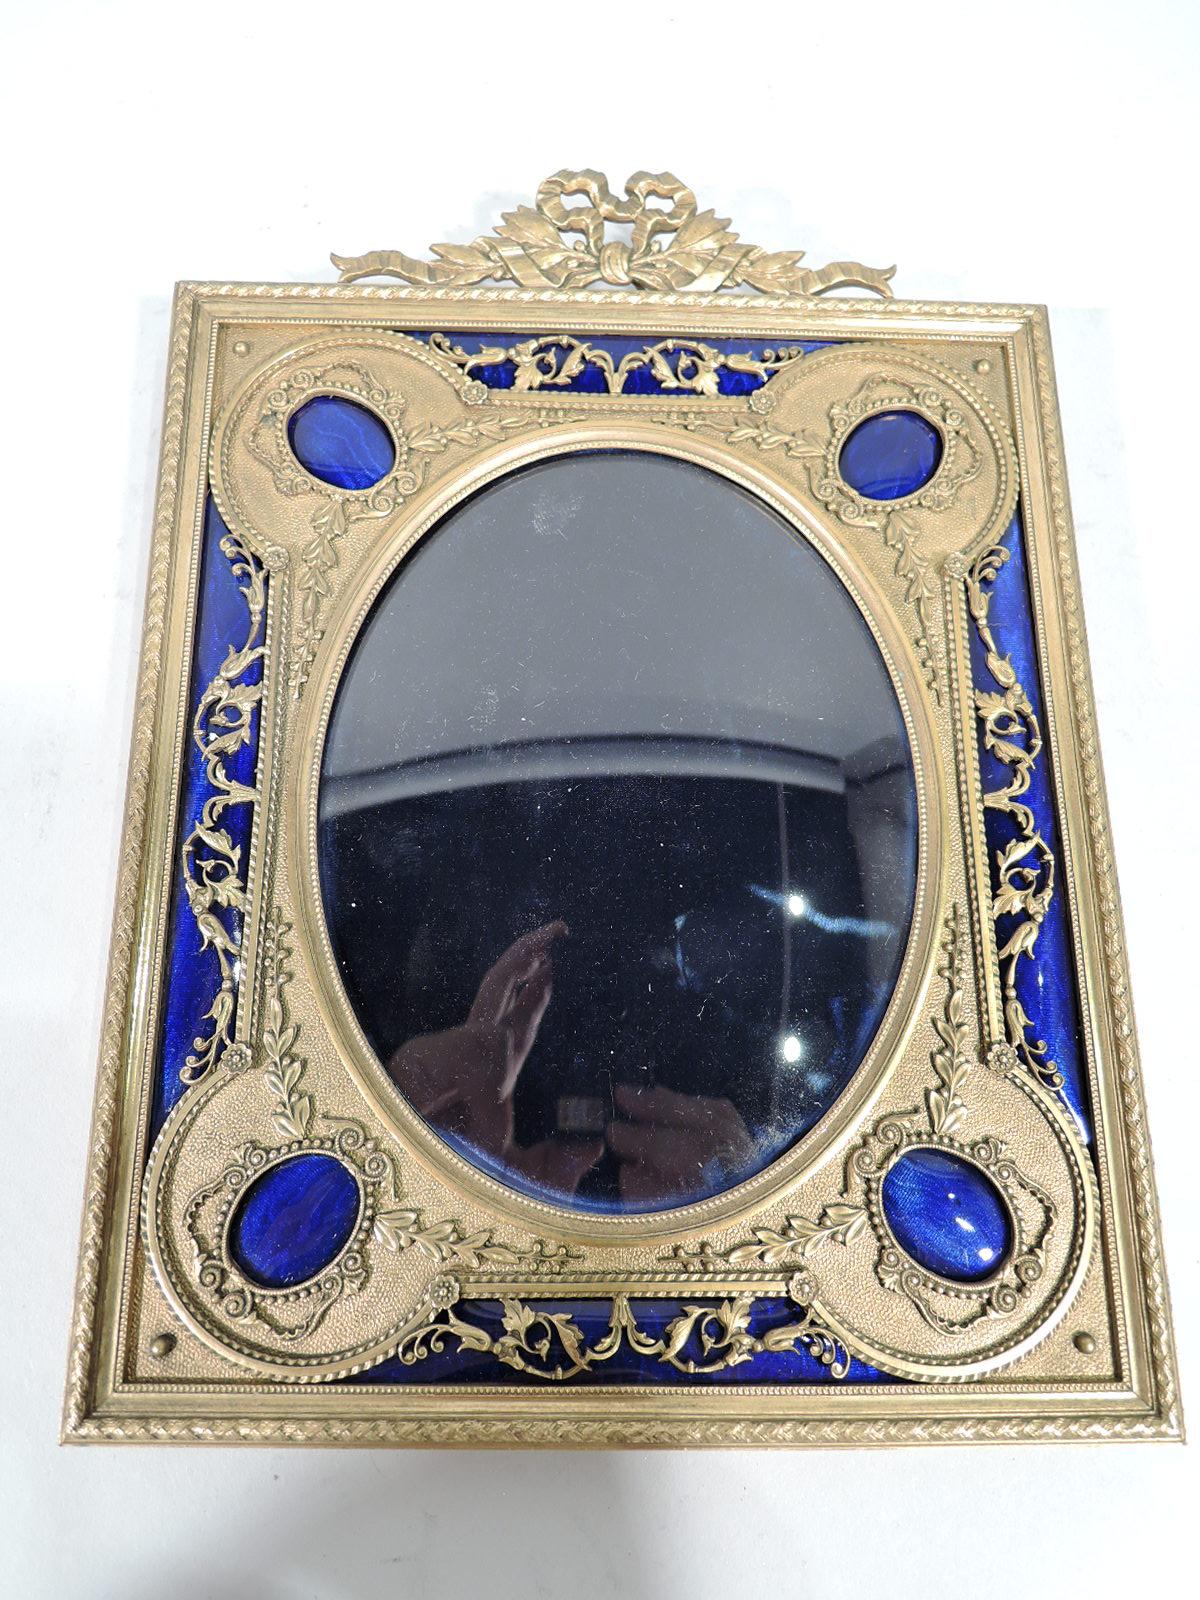 French Rococo gilt bronze and enamel picture frame. Oval window with four open lobes and filigree scrollwork on enamel ground. Surround rectangular with bow-tied ribbon crown. Enamel deep blue. With glass, velvet lining, brocade back, and hinged